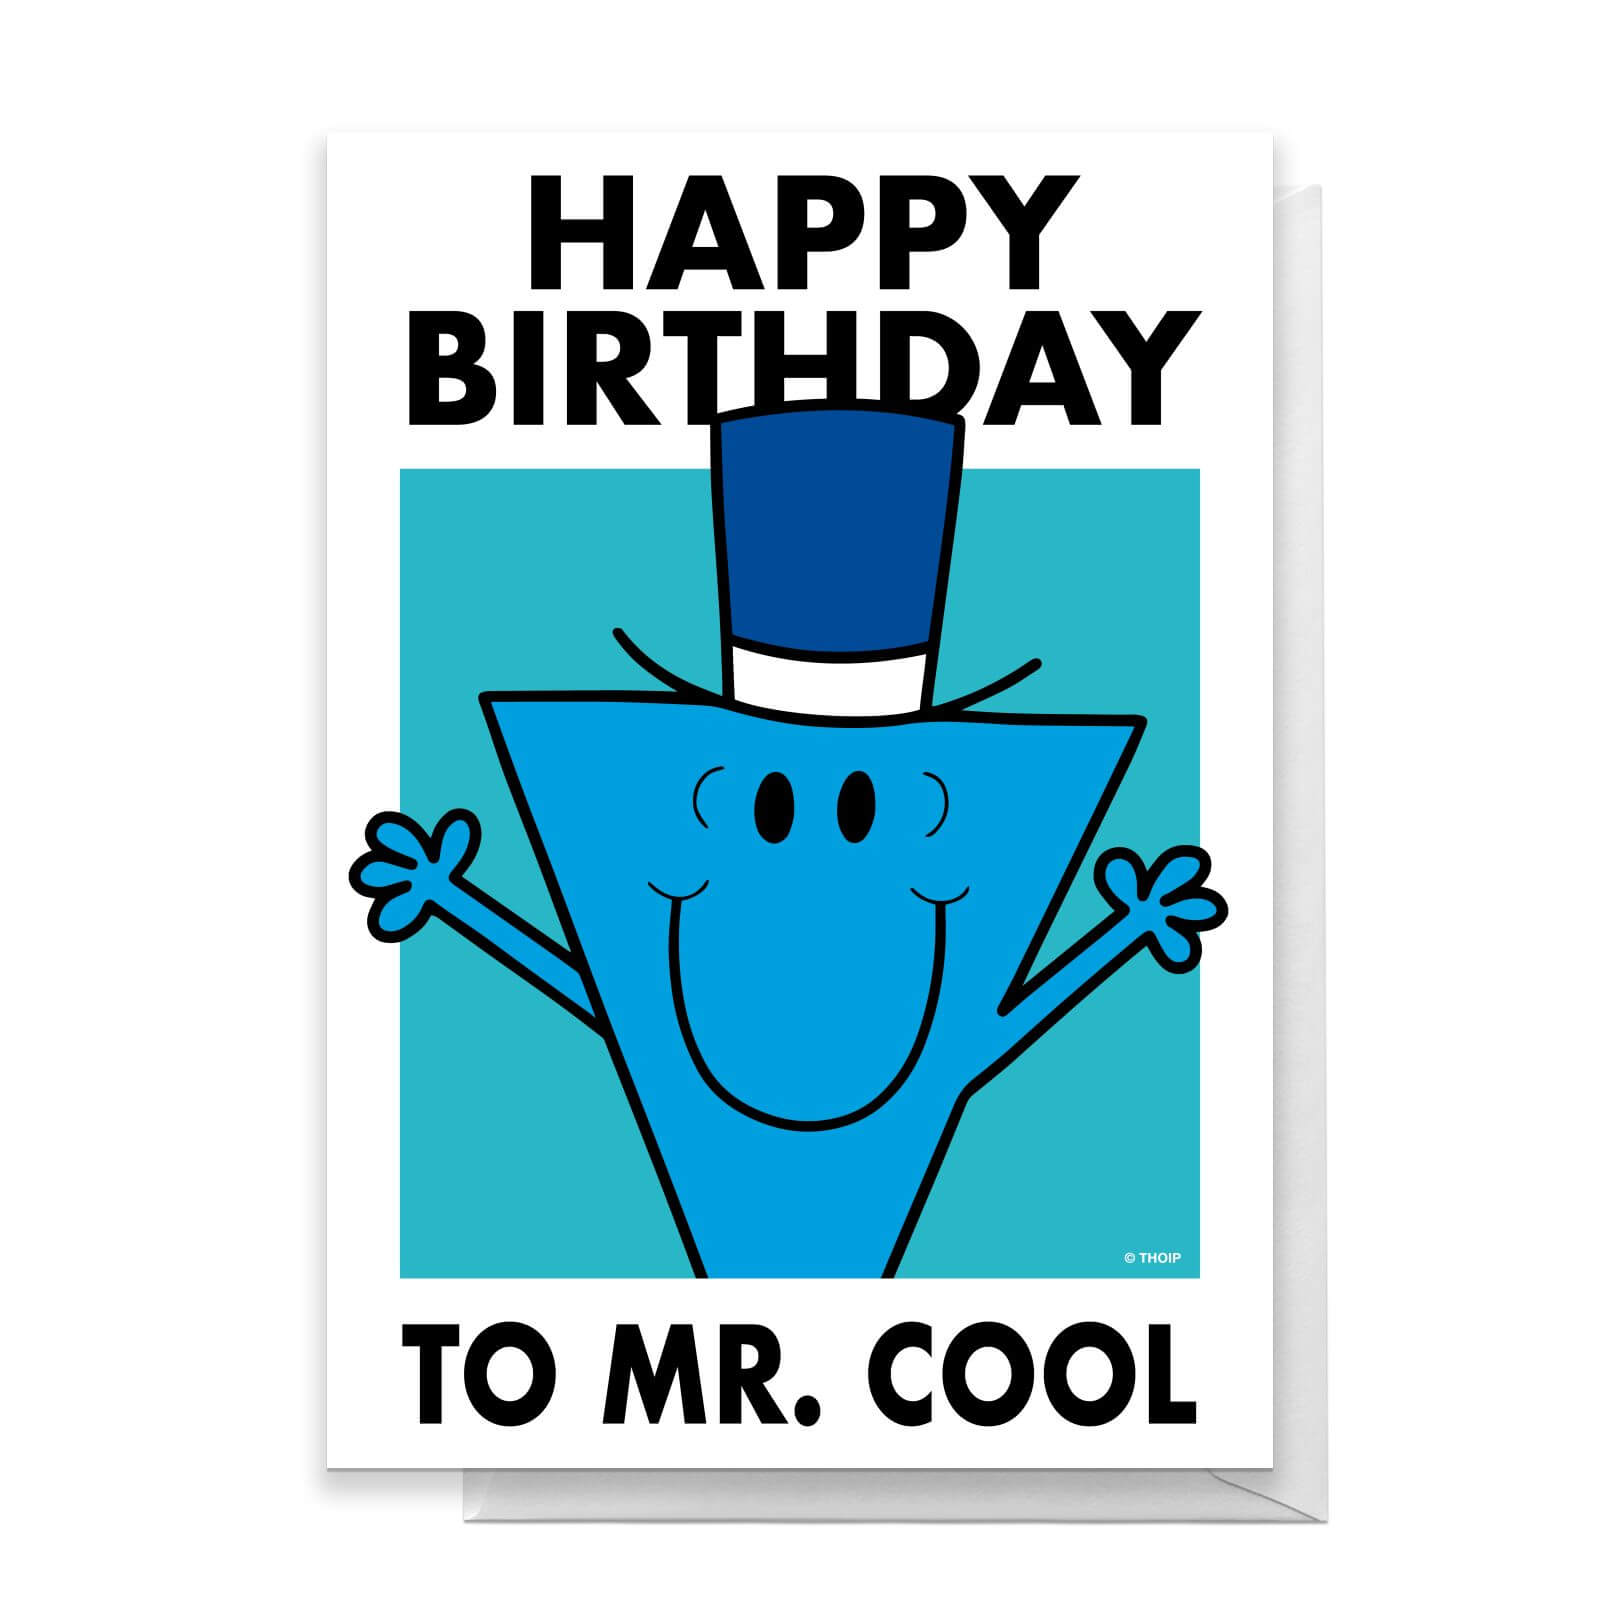 Mr Men & Little Miss Happy Birthday To Mr. Cool Greetings Card - Standard Card